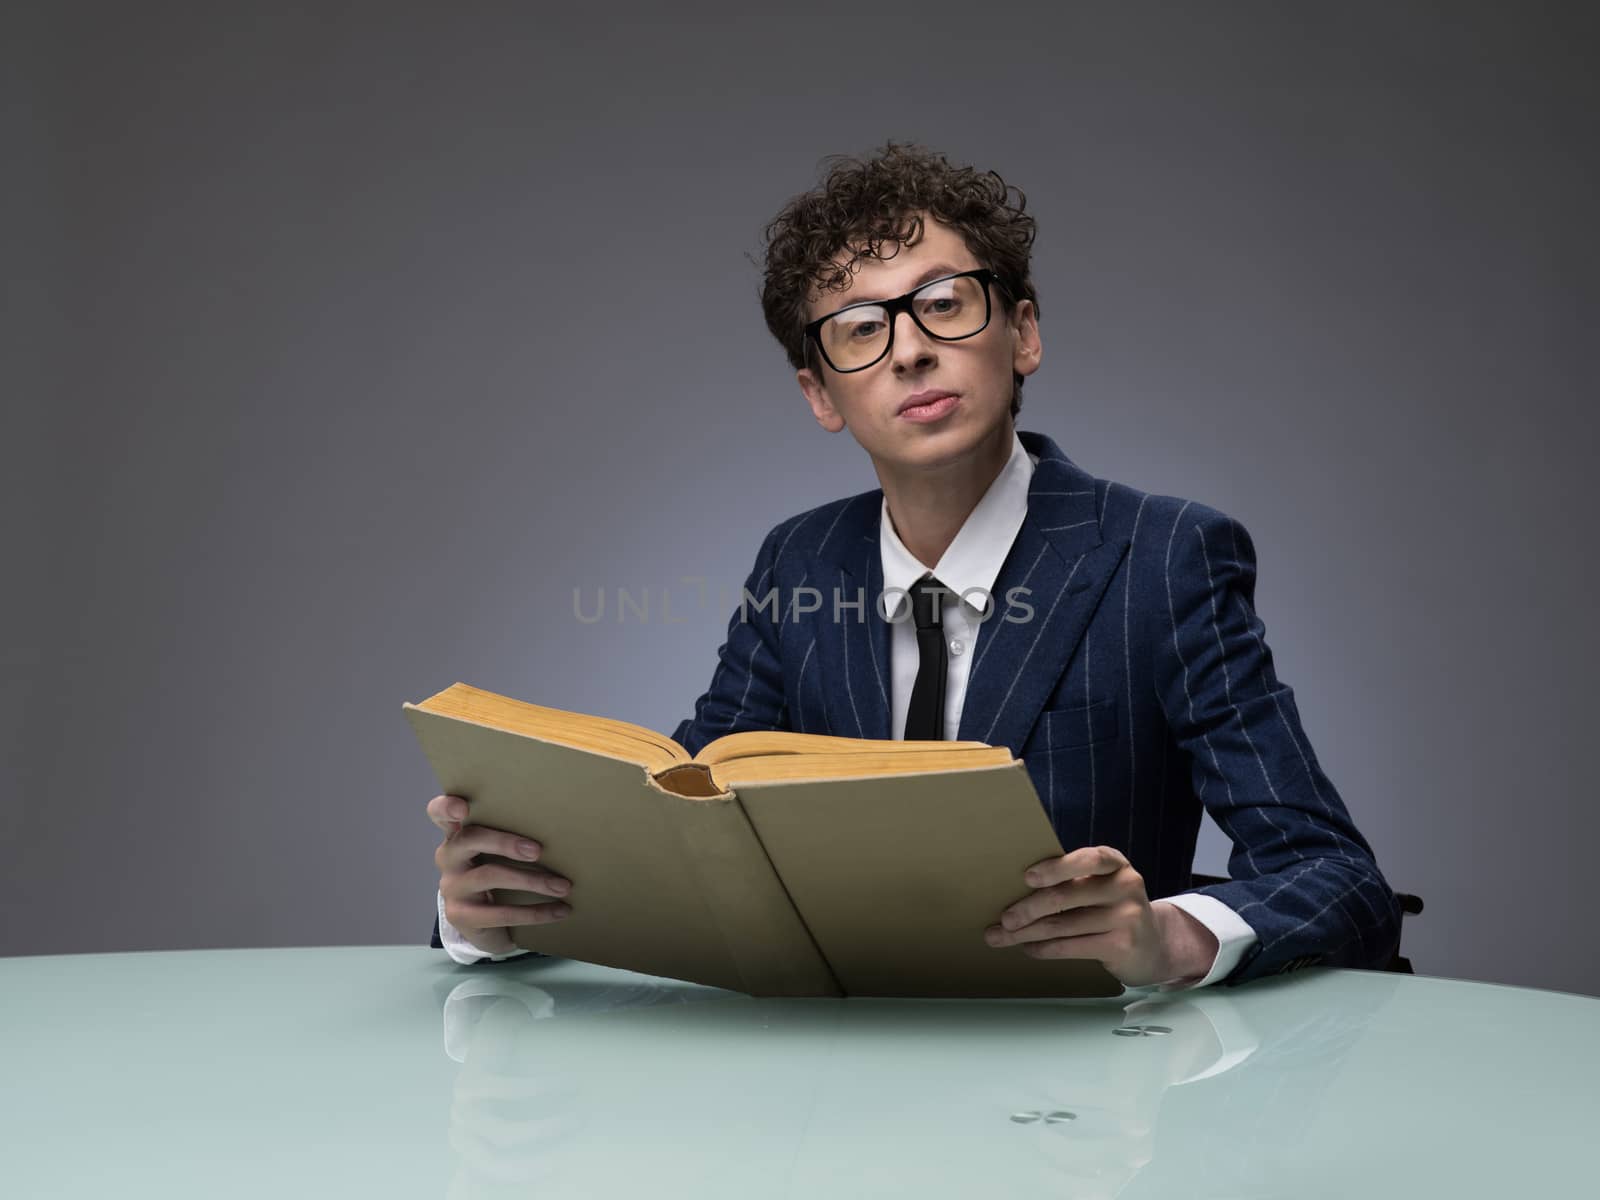 Funny man in striped suit reading a book over gray background. Professional actor facial expression.